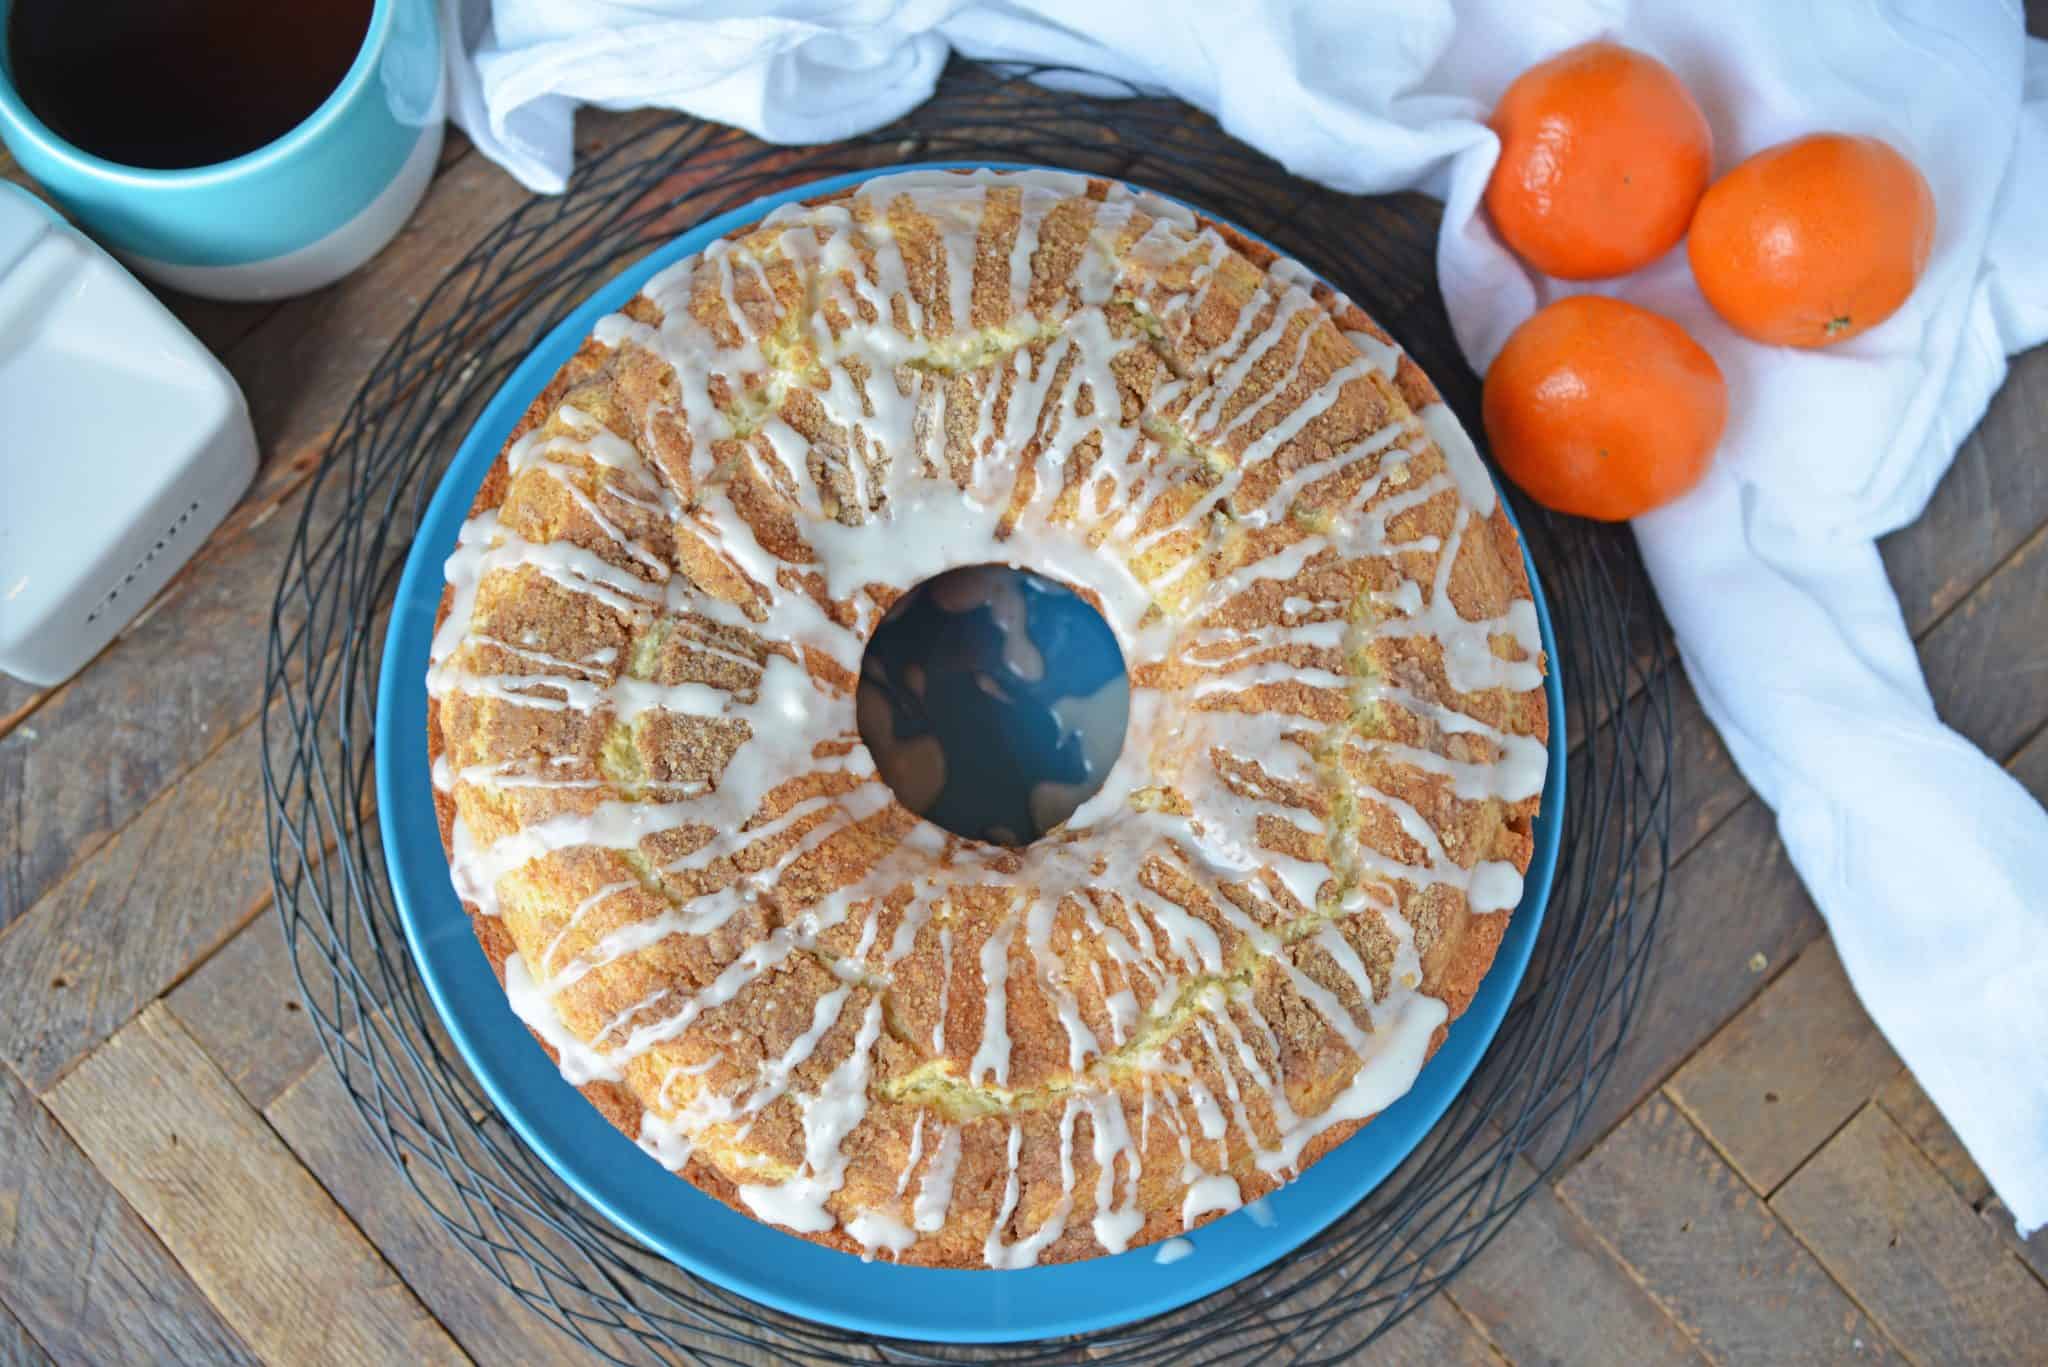 Sour Cream Coffee Cake is an easy coffee cake recipe with a streusel ribbon and crumb topping. Super moist without being overly sweet. Perfect for brunch or dessert. #sourcreamcoffeecake #easycoffeecakerecipe www.savoryexperiments.com 